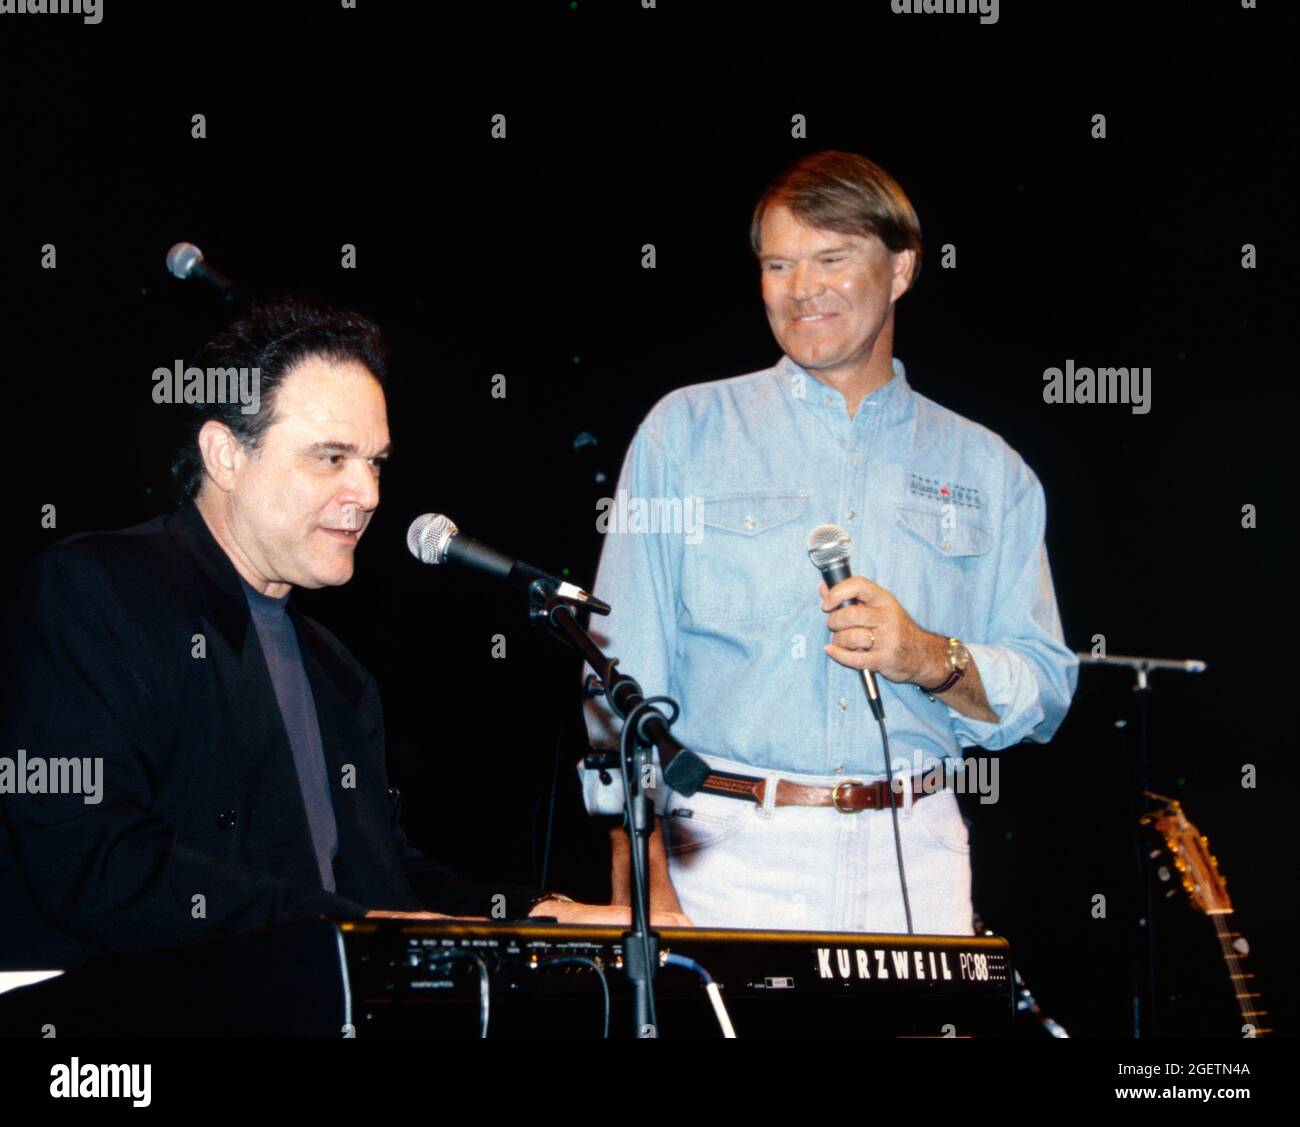 Glen Campbell and song writer, Larry Weiss on keyboard give an impromptu performance of “Rhinestone Cowboy” at Campbell's surprise 60th birthday celebration in Branson, Missouri on April 20, 1996, two days before his actual birthday. Stock Photo